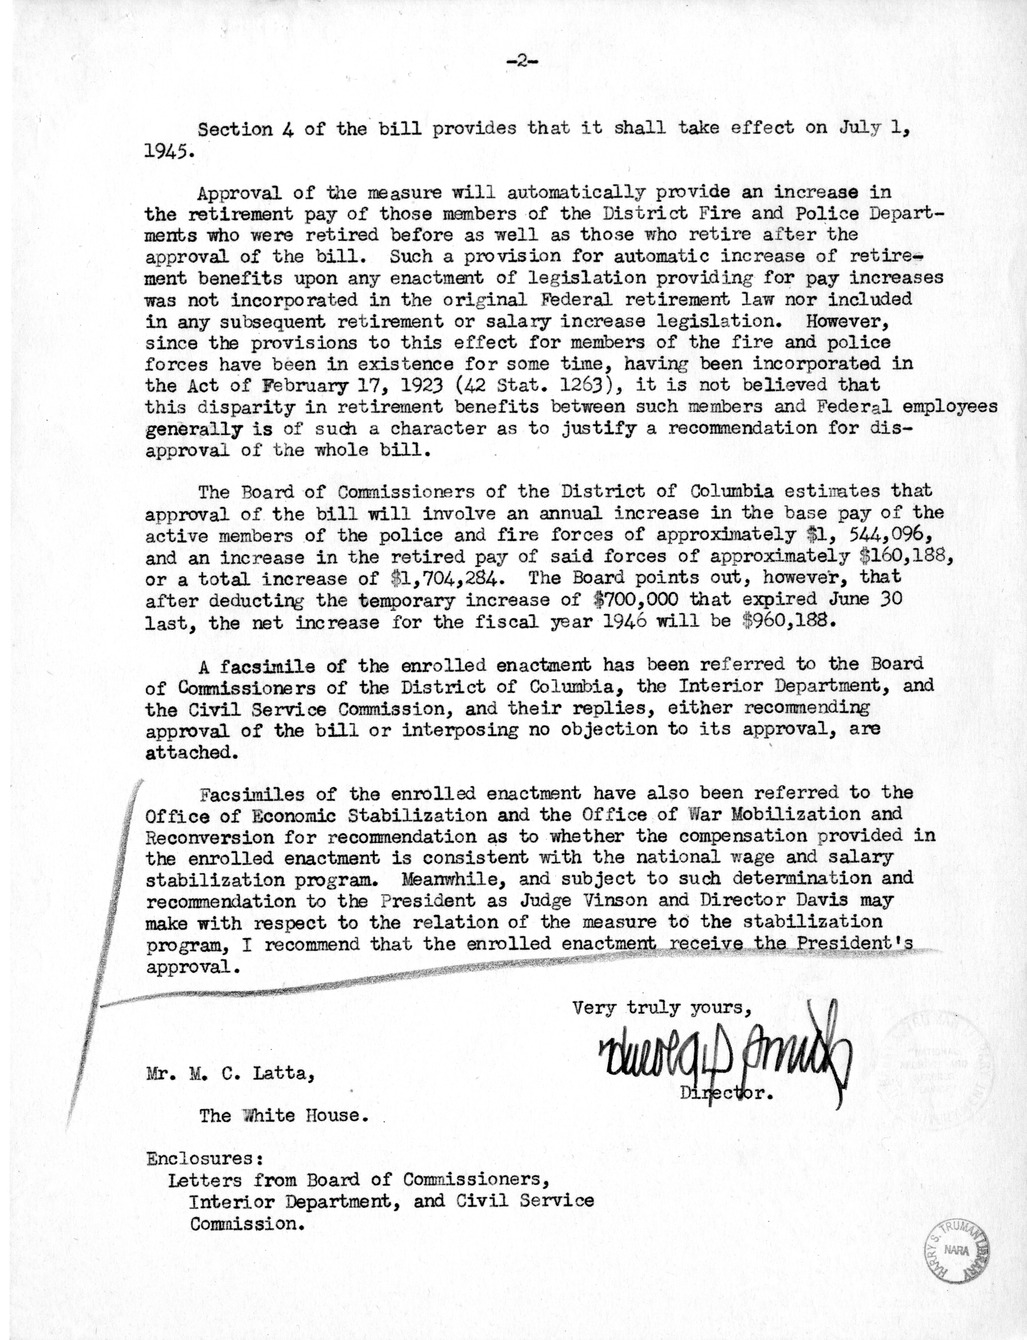 Memorandum from Harold D. Smith to M. C. Latta, H.R. 3291, To Provide for an Adjustment of Salaries of the Metropolitan Police, the United States Park Police, the White House Police, and the Members of the Fire Department of the District of Columbia, with